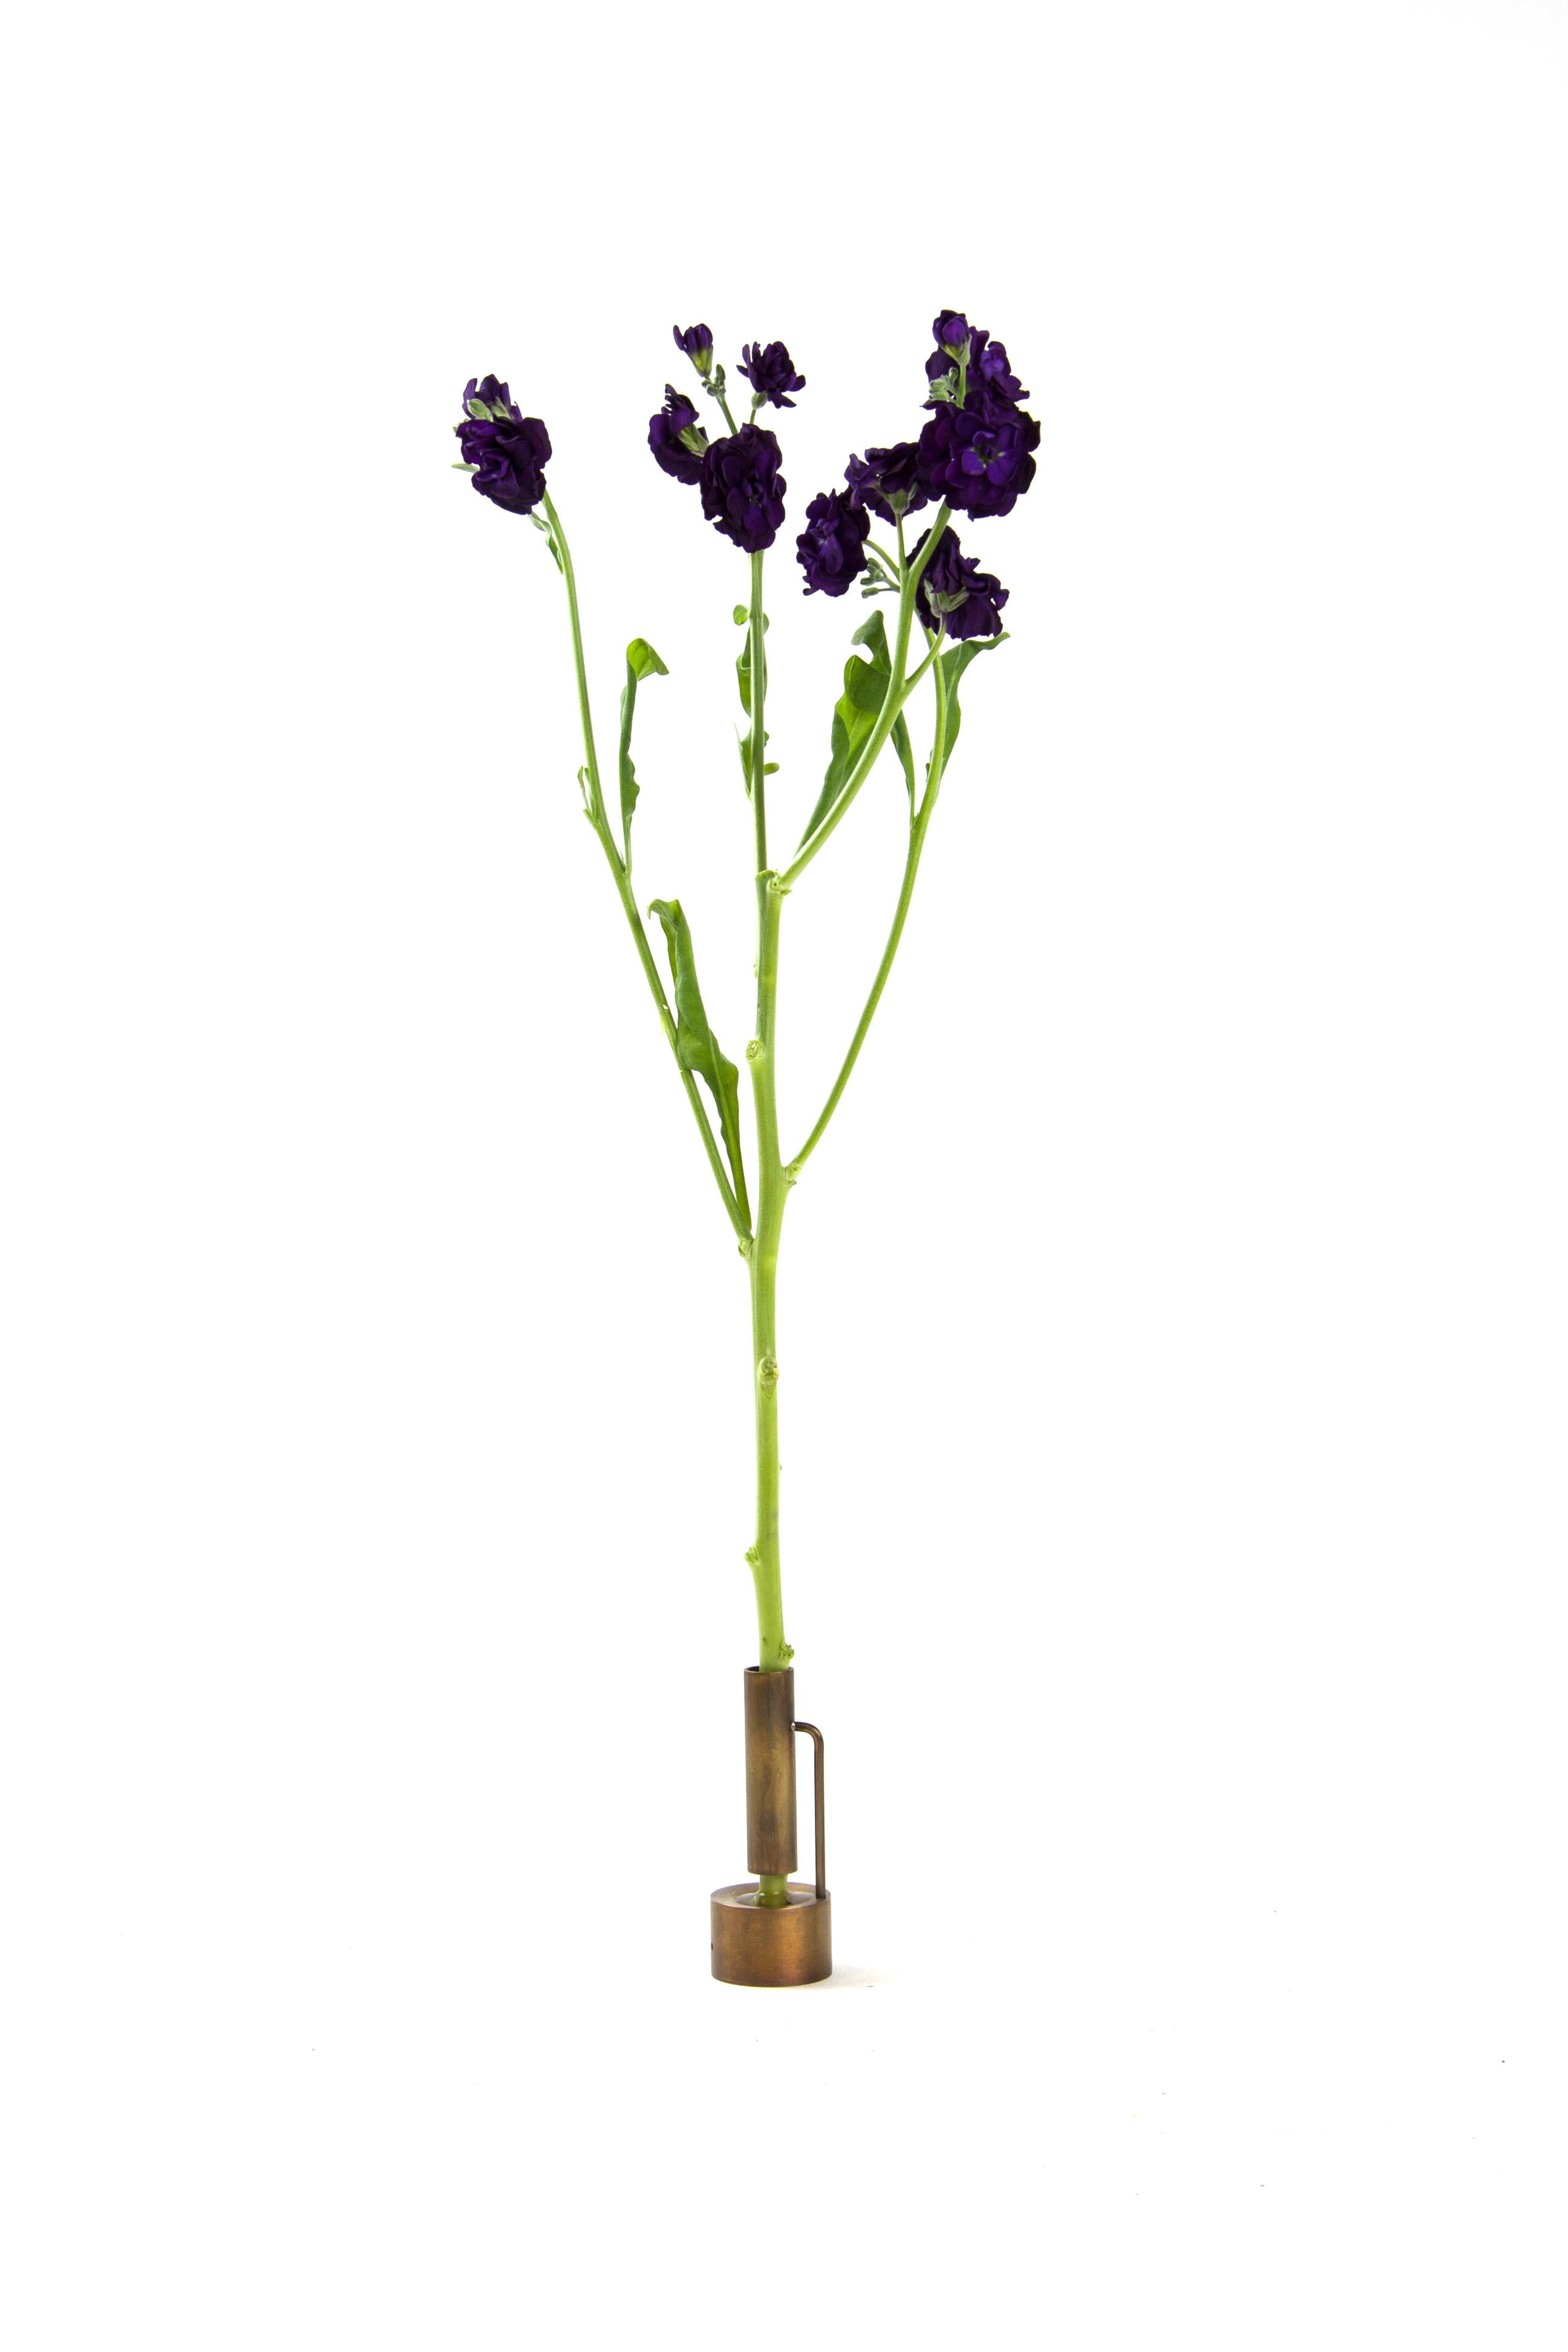 Brass bud vase by Gentner Design
Dimensions: D 5 x W 5 x H 10 cm
Materials: dull tarnished brass

Each of these delicately, handcrafted Bud Vases is perfect as an individual home accessory or whimsical series. Made of brass and hand tarnished,